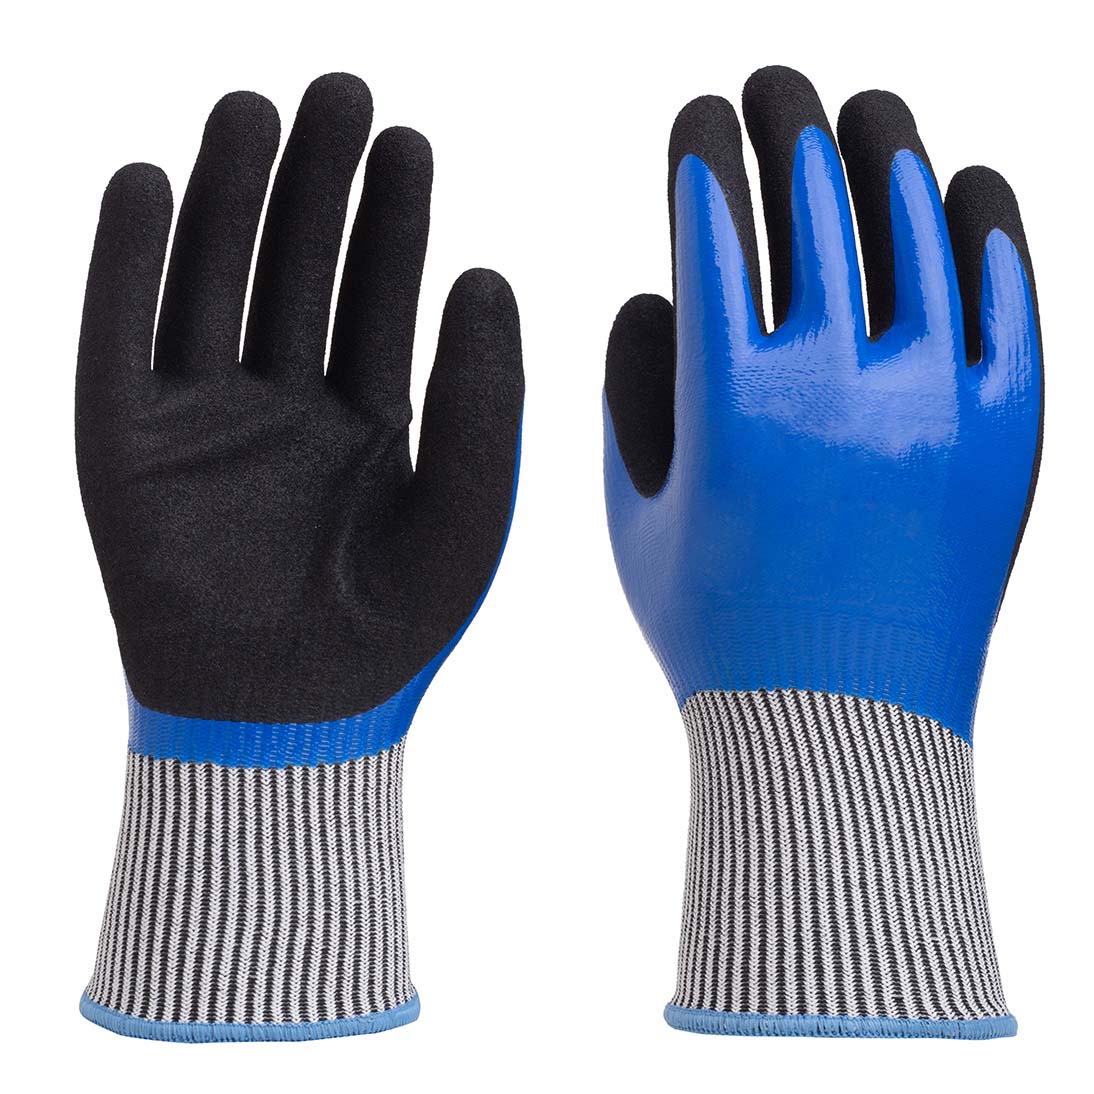 15G Polyester glove double layer nitrile coated 